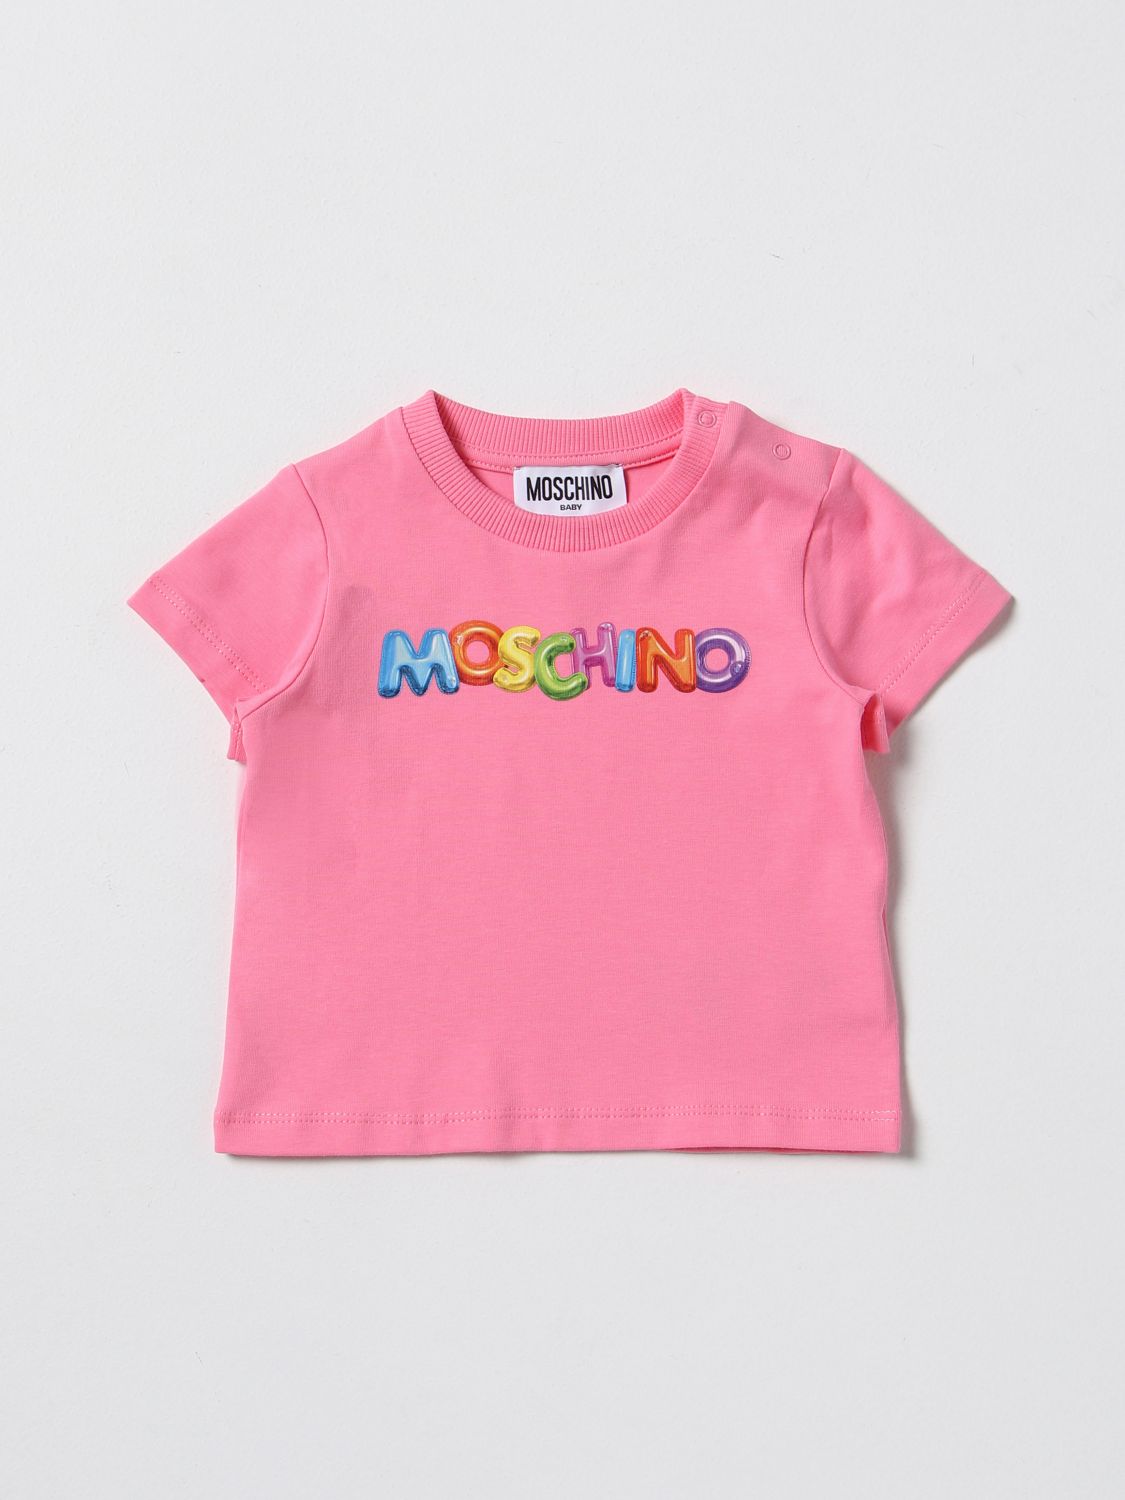 Moschino Baby T-shirt  Kids Color Pink